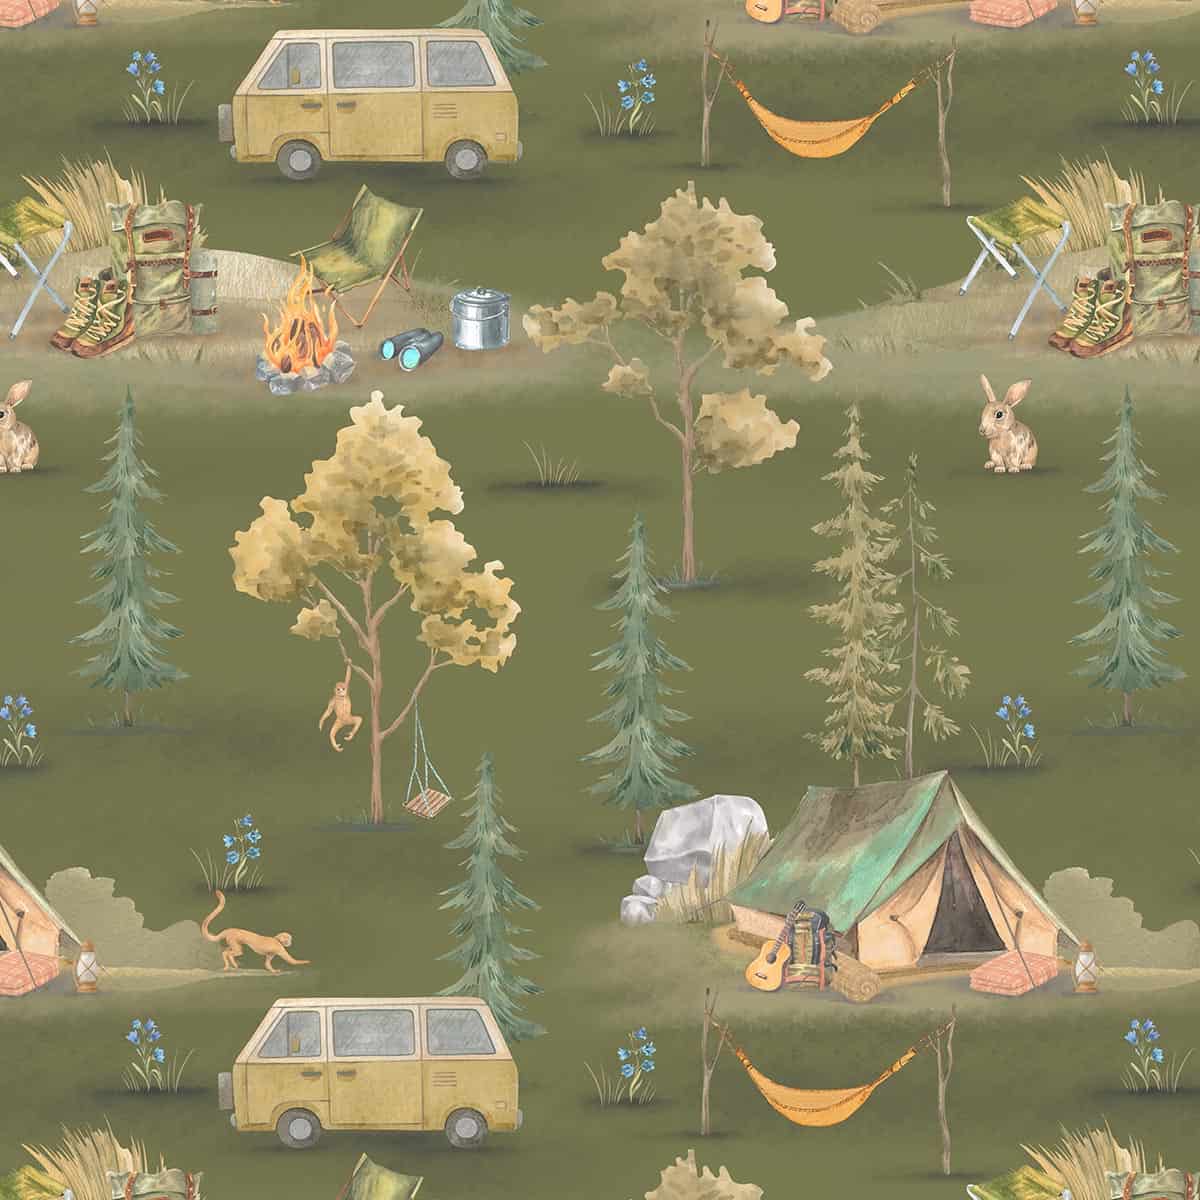 Wildlife Campout in the Jungle, Design for Kids, Green